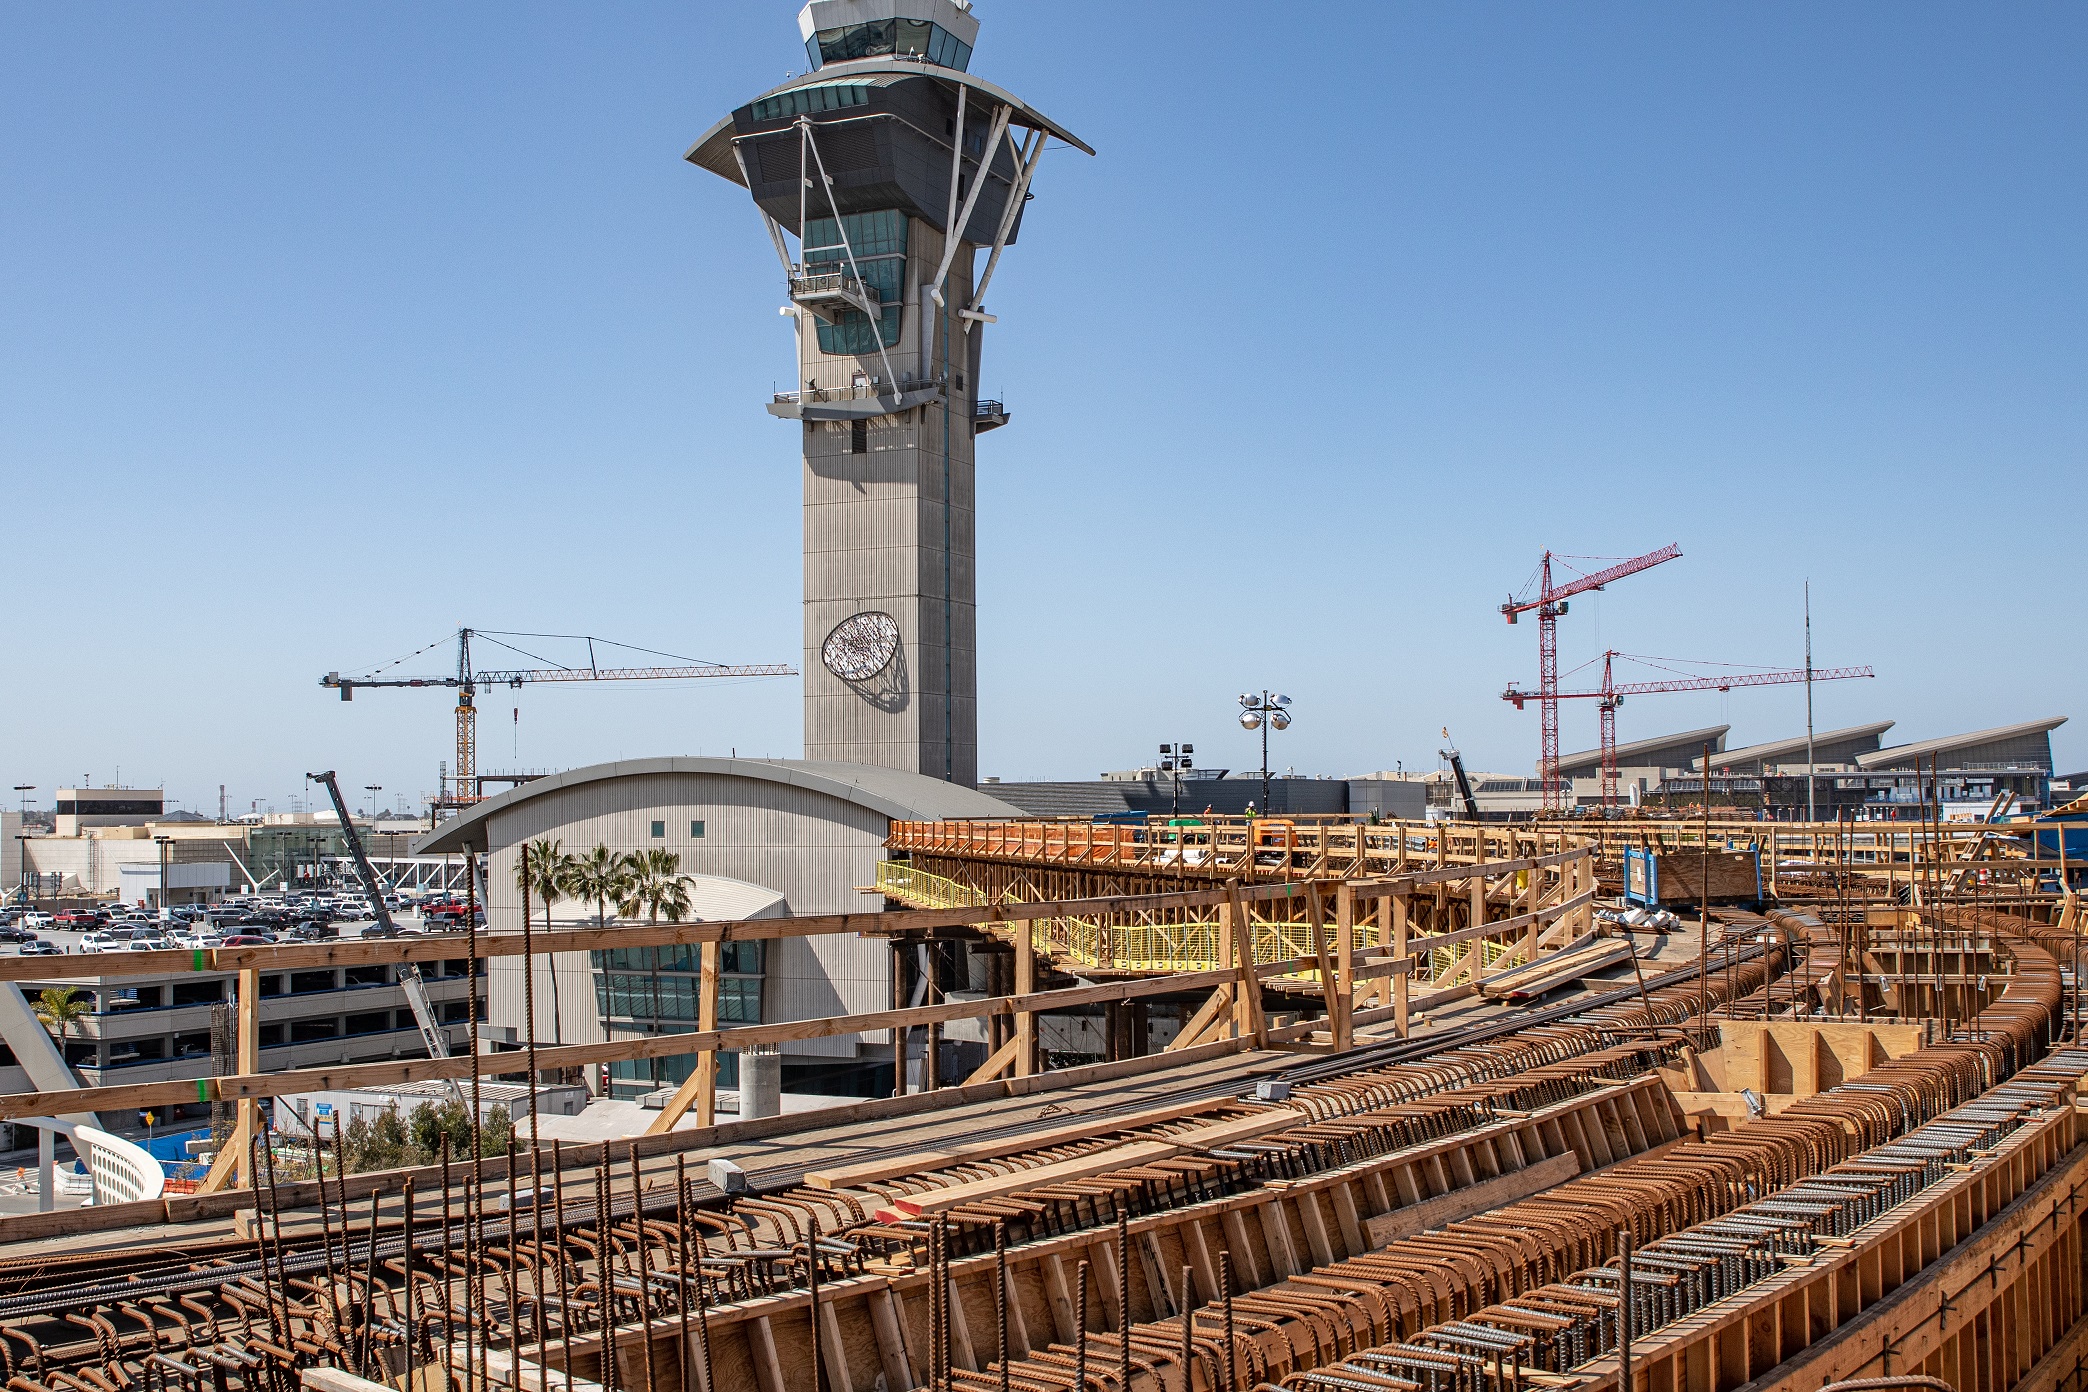 The APM guideway will curve around the Los Angeles International Airport Theme Building and pass by the LAX Control tower as it approaches the future Center Central Terminal Area station.